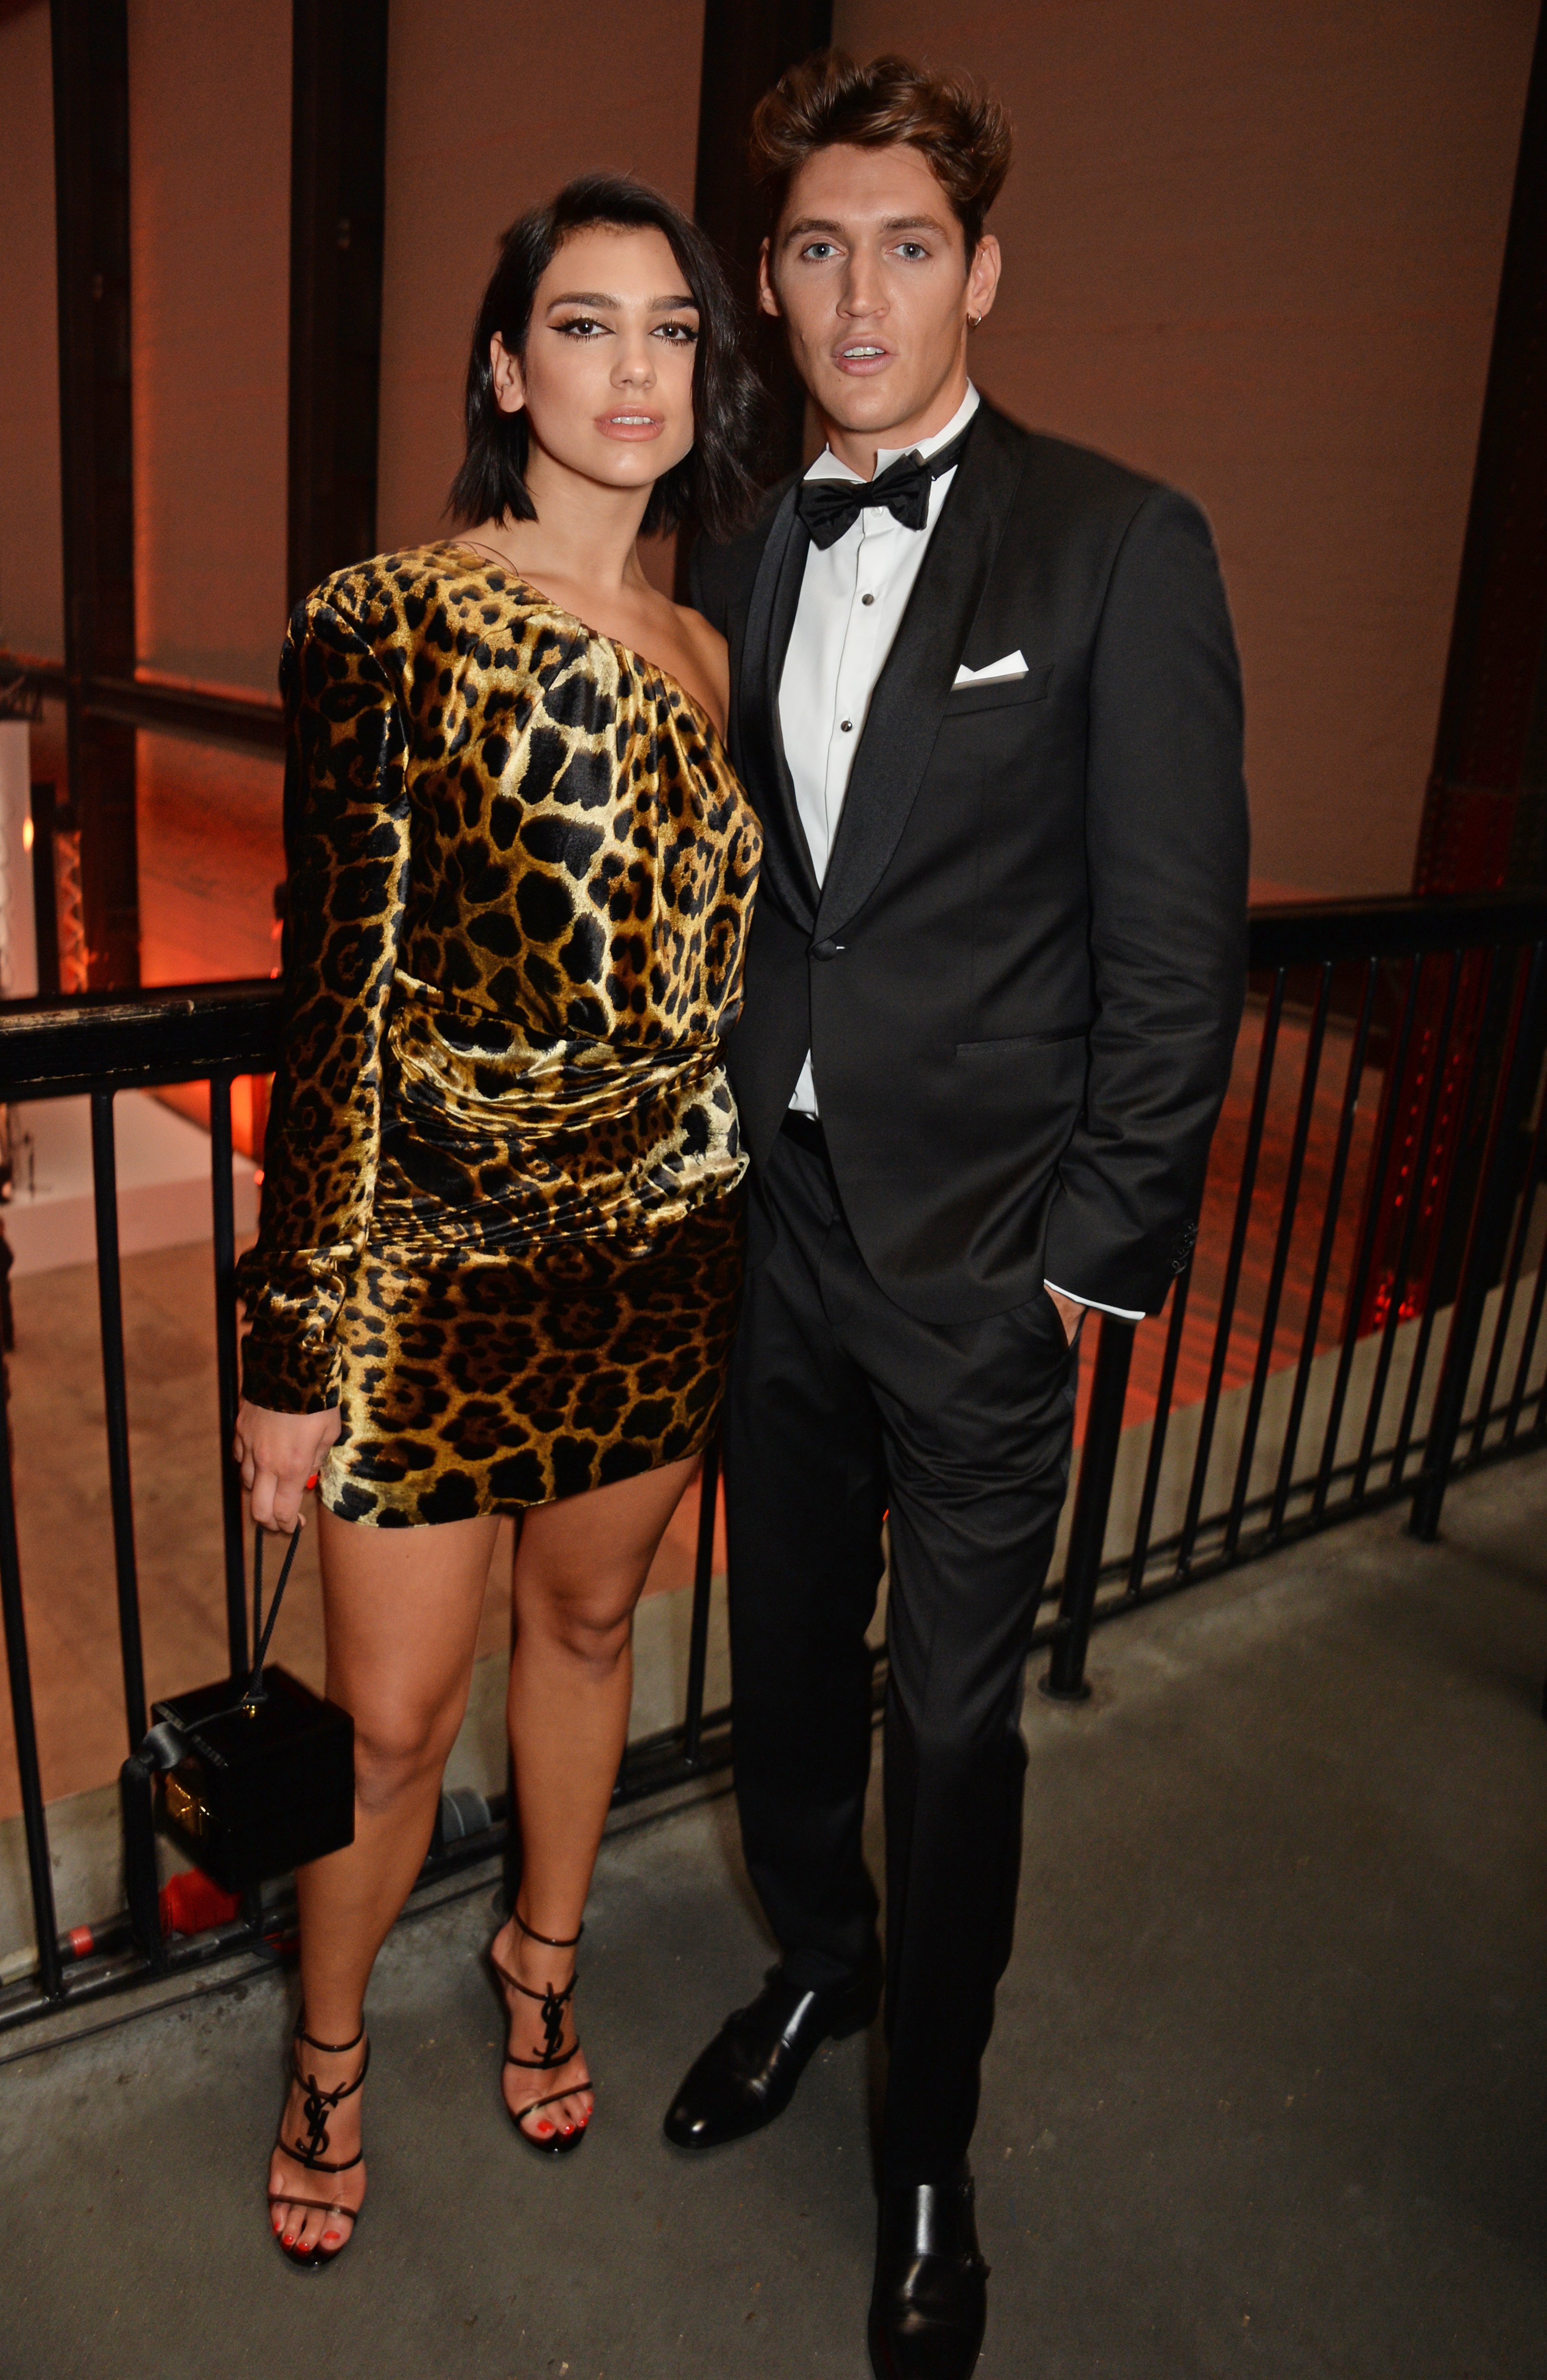 Dua Lipa and Isaac Carew at the GQ Men of the Year Awards in London, England on September 5, 2018 | Source: Getty Images 